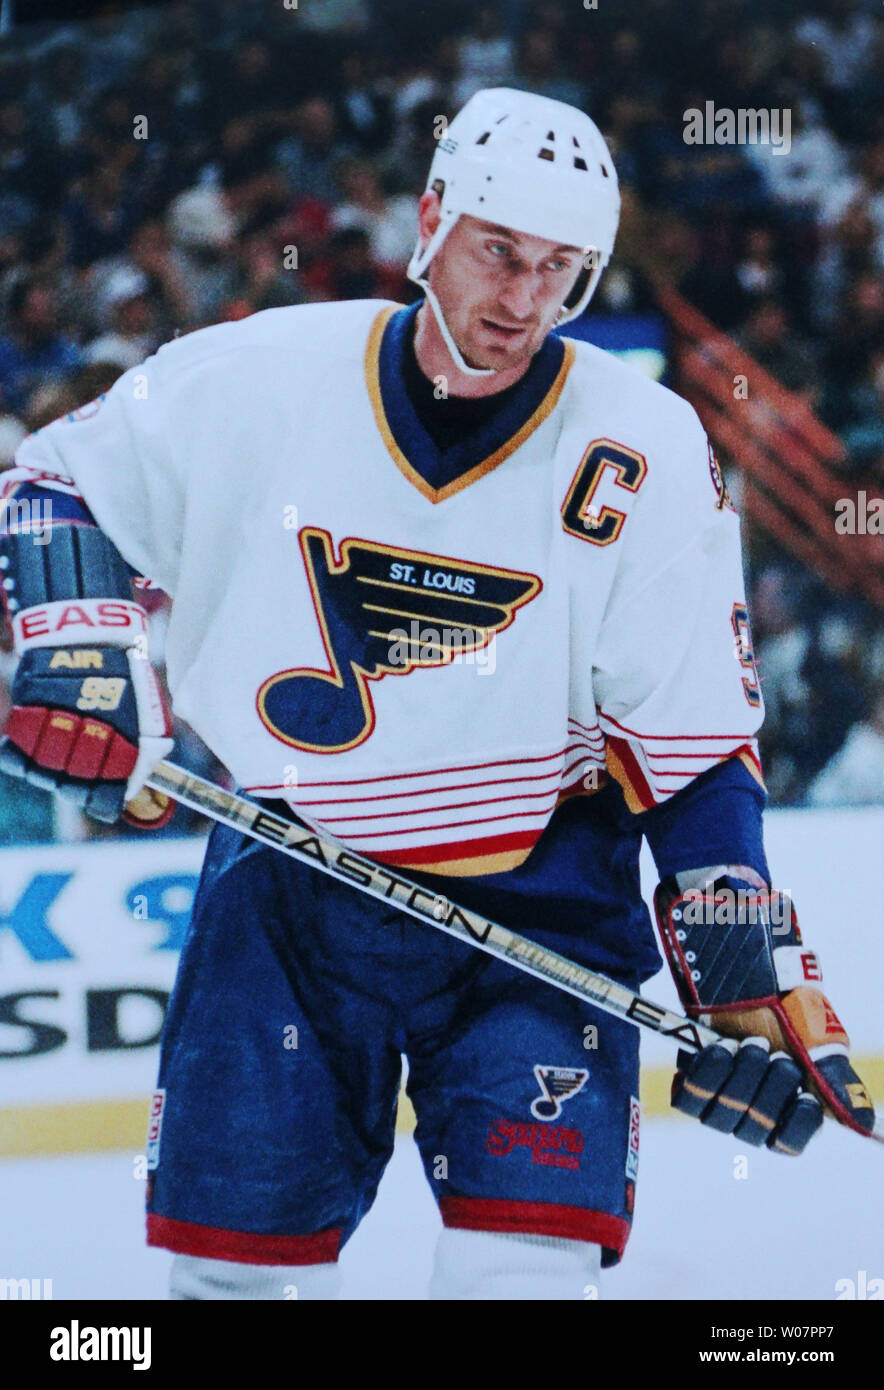 Wayne gretzky hi-res stock photography and images - Alamy